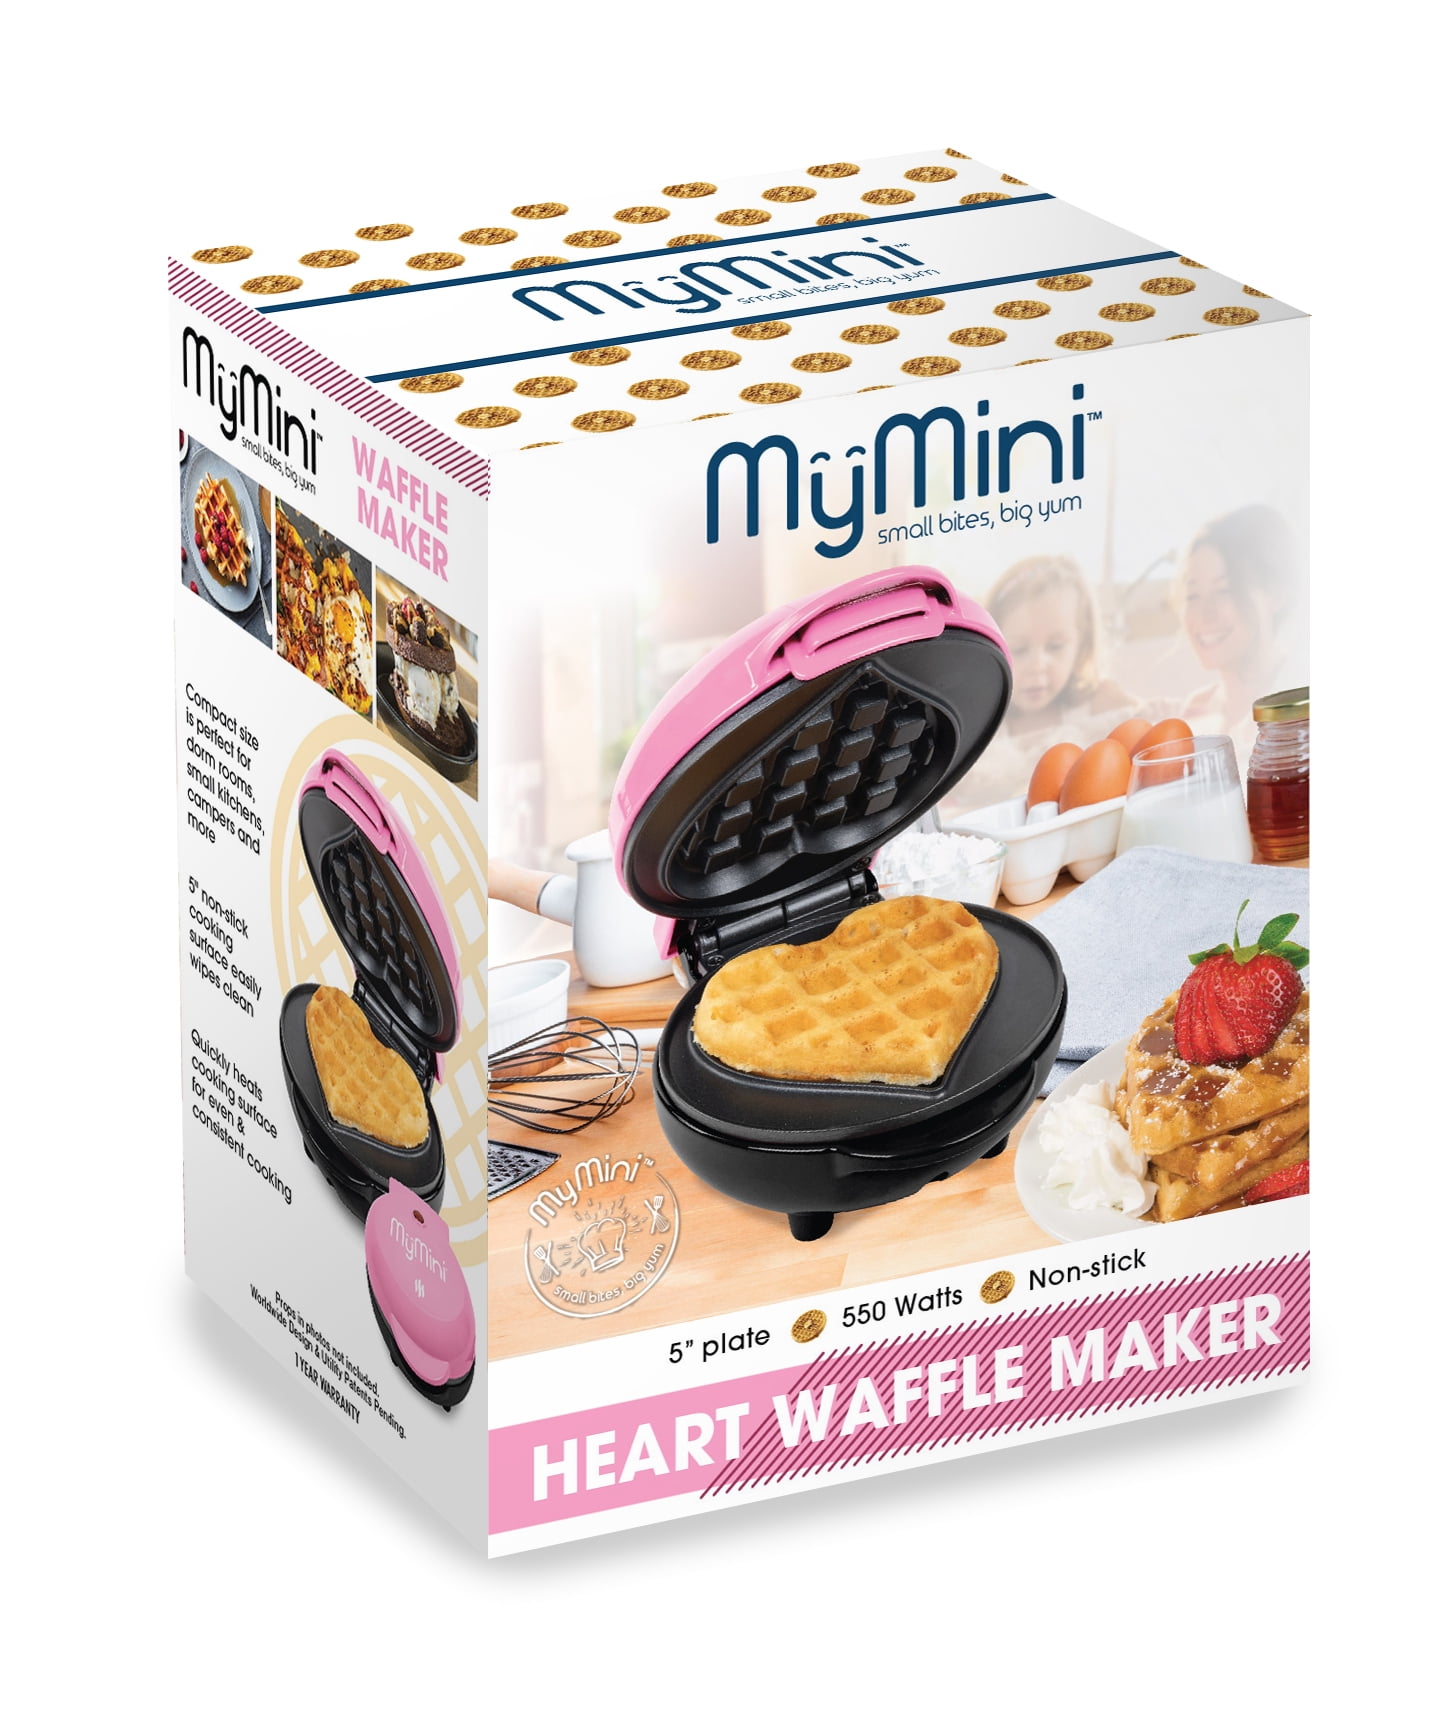 Mueller Double Heart Waffle Maker, Makes 10 Mini Hearts or 2 Large